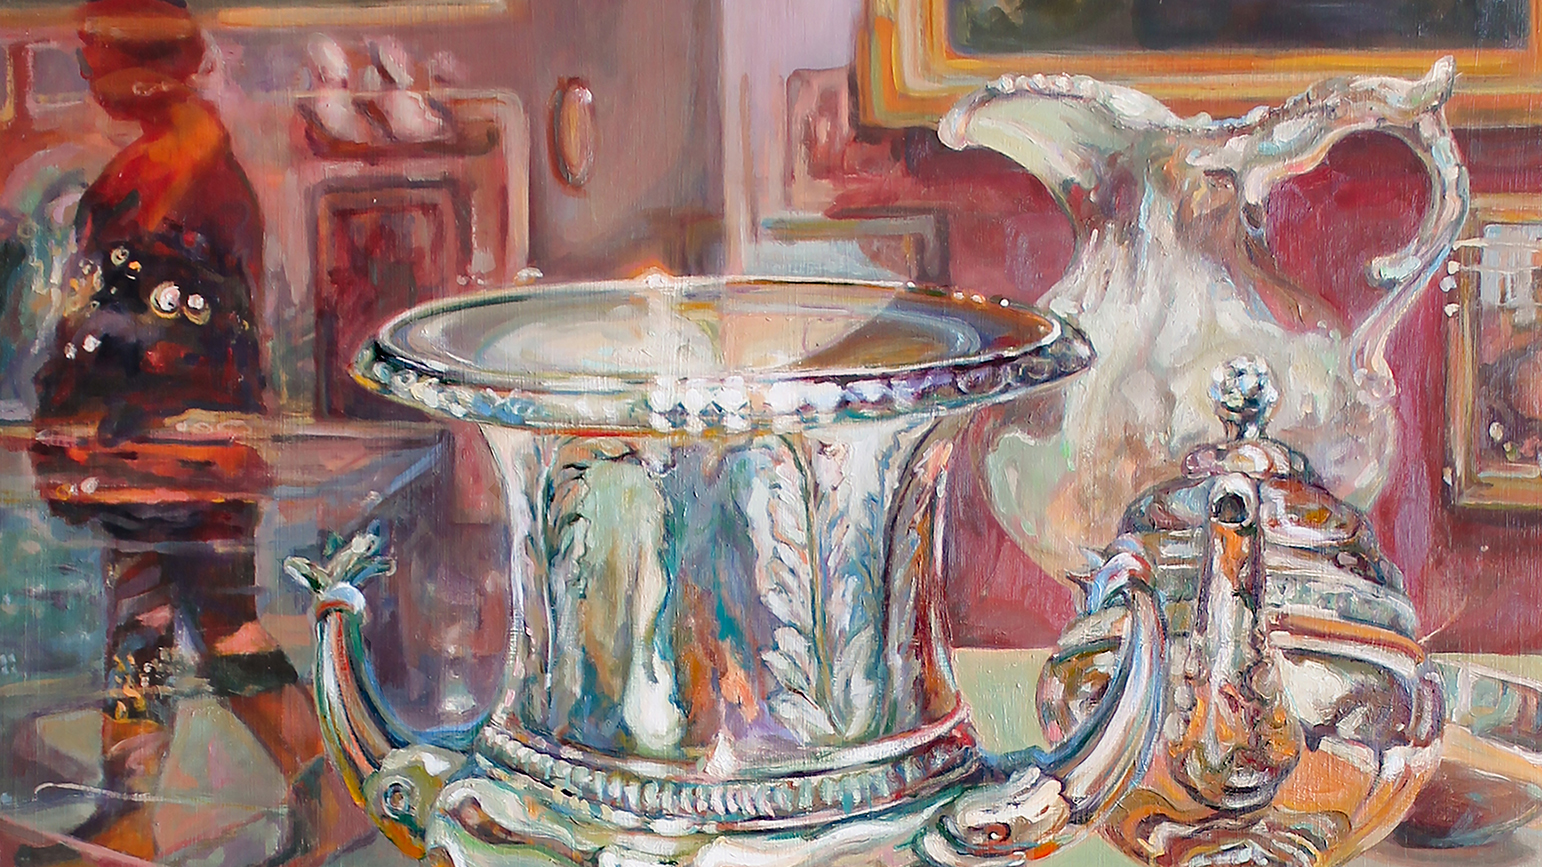 Painting of silver vessels reflecting many colors in a shop window